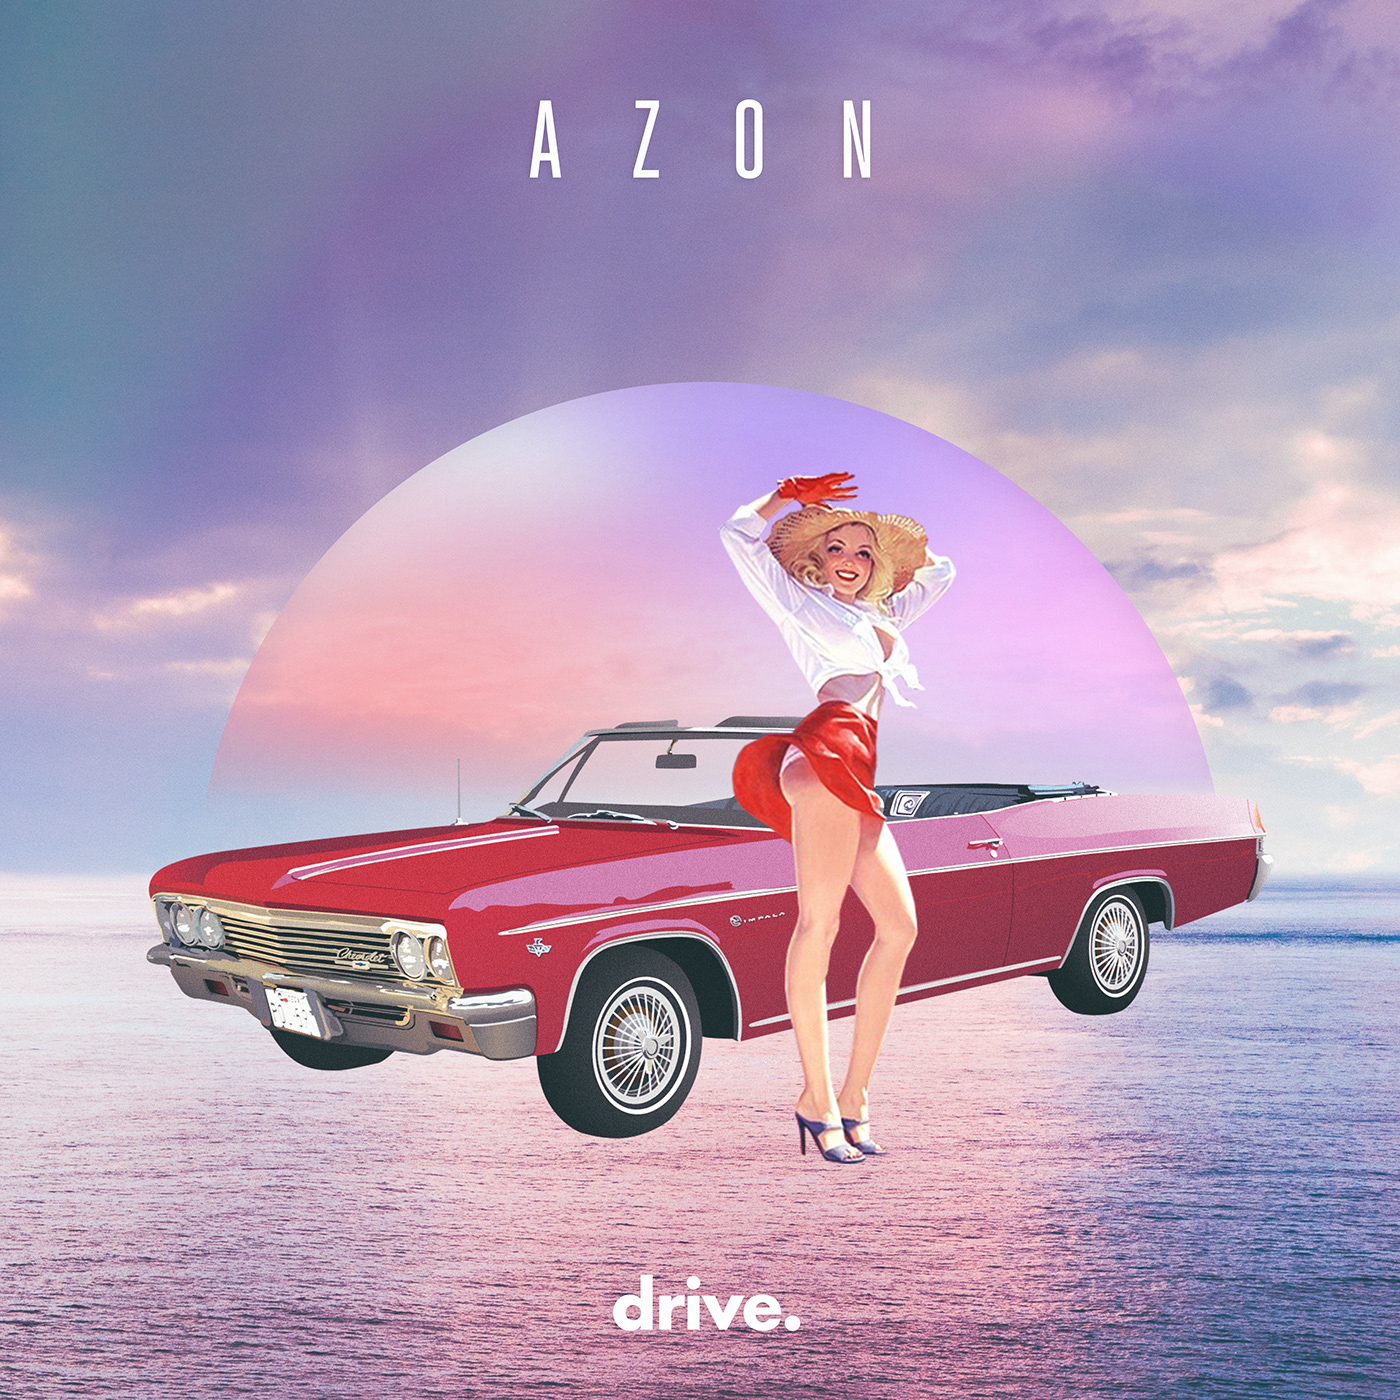 azon drive album cover collage azon drive vynil summer song